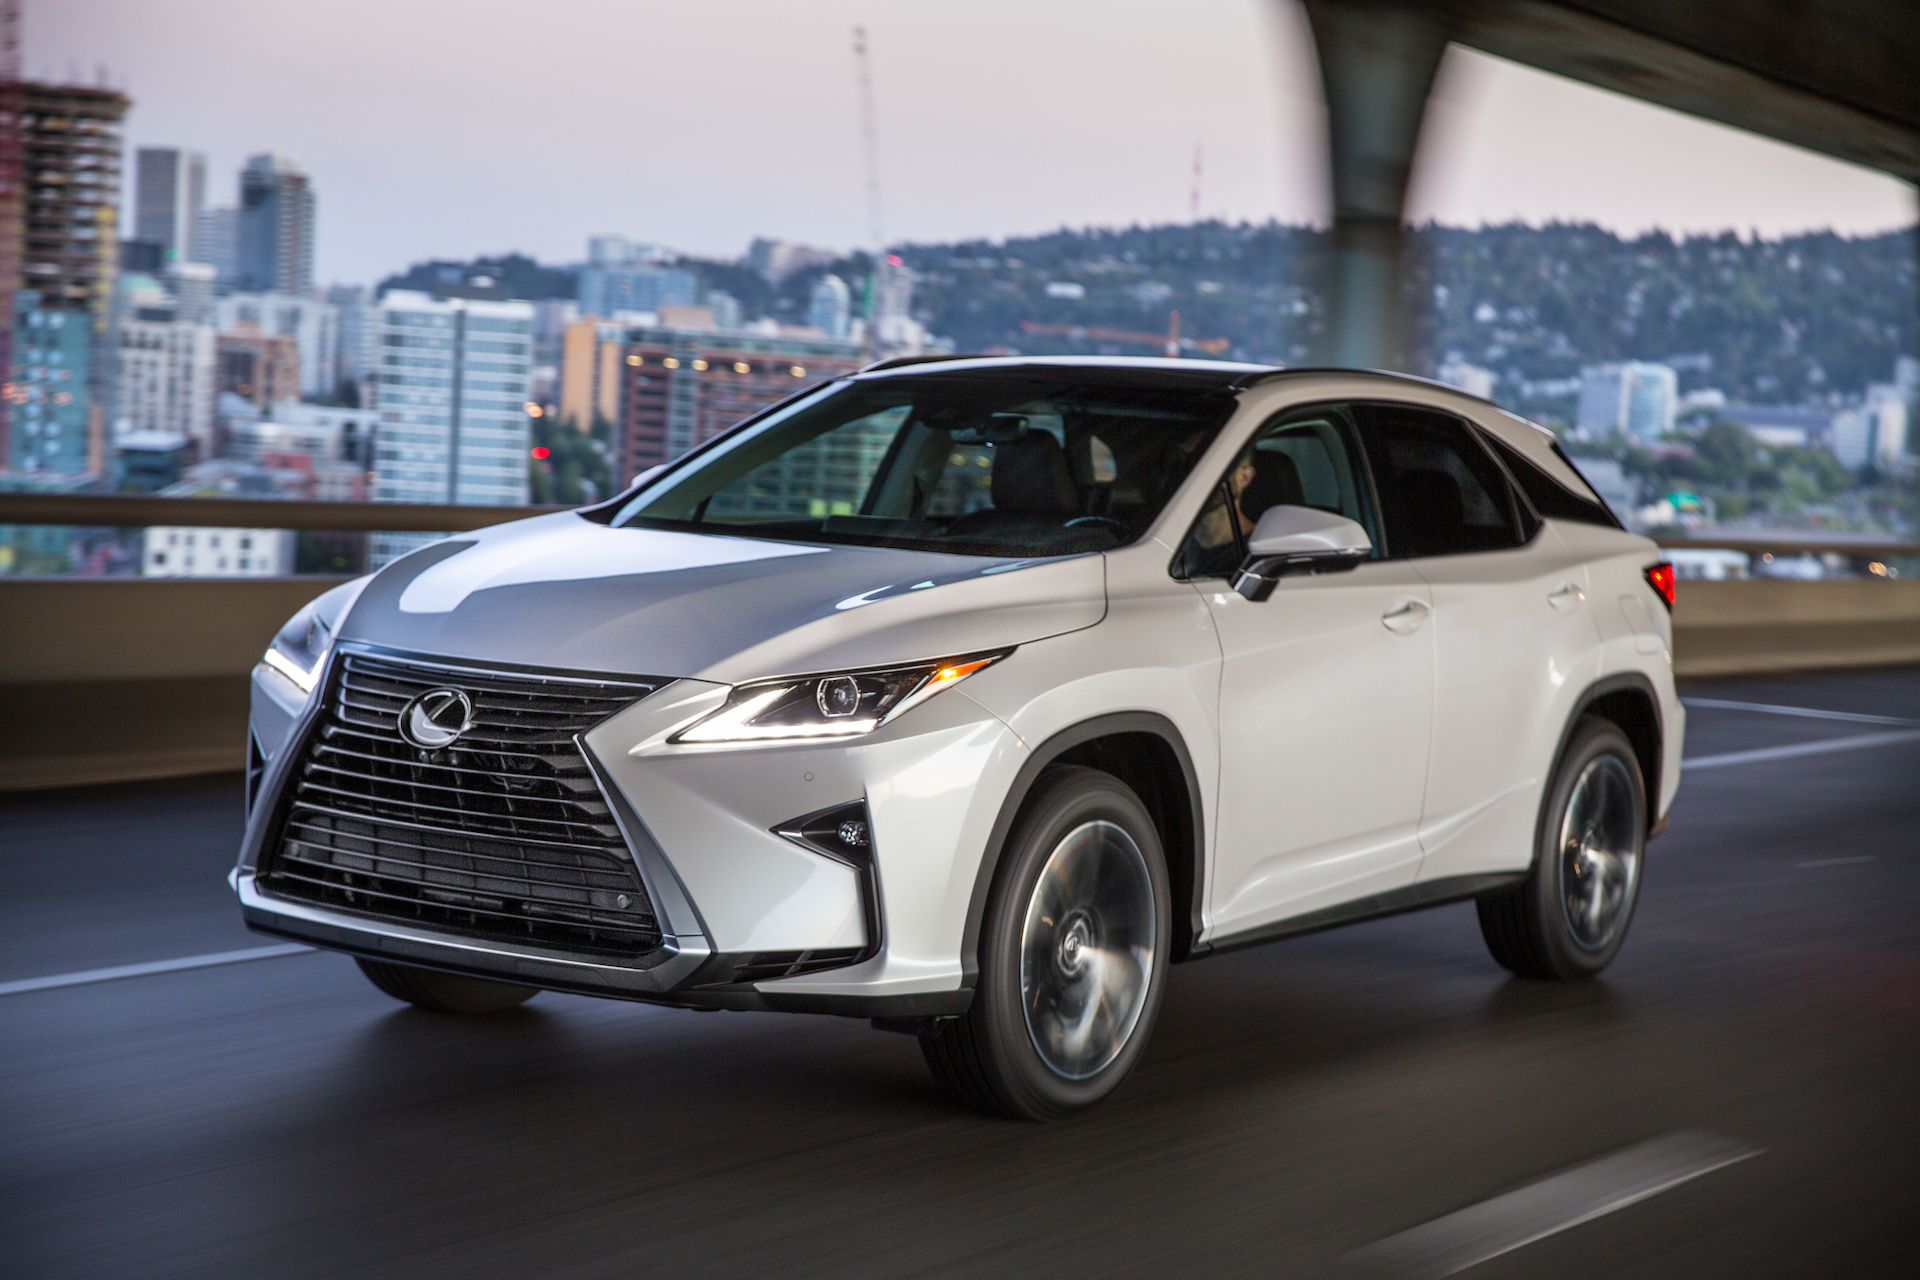 42 Best Pictures Lexus Sport Suv 2018 - Lexus Lx570 4WD 2018 Sport Suv Full Options for sale in ...